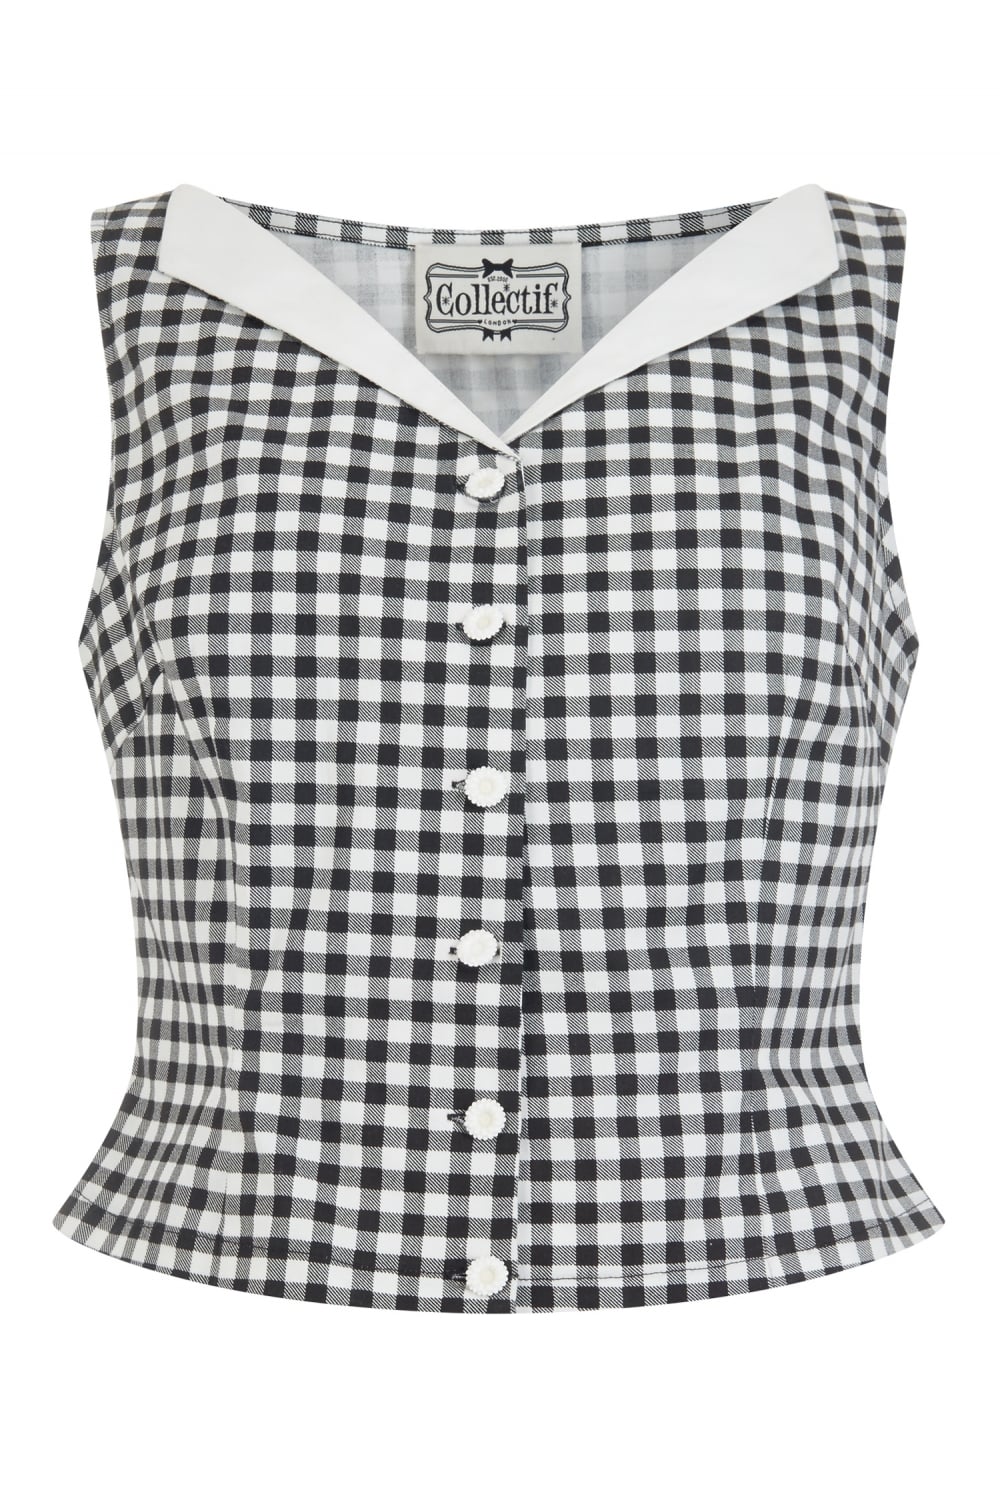 Collectif Judy Gingham top, endast 4XL